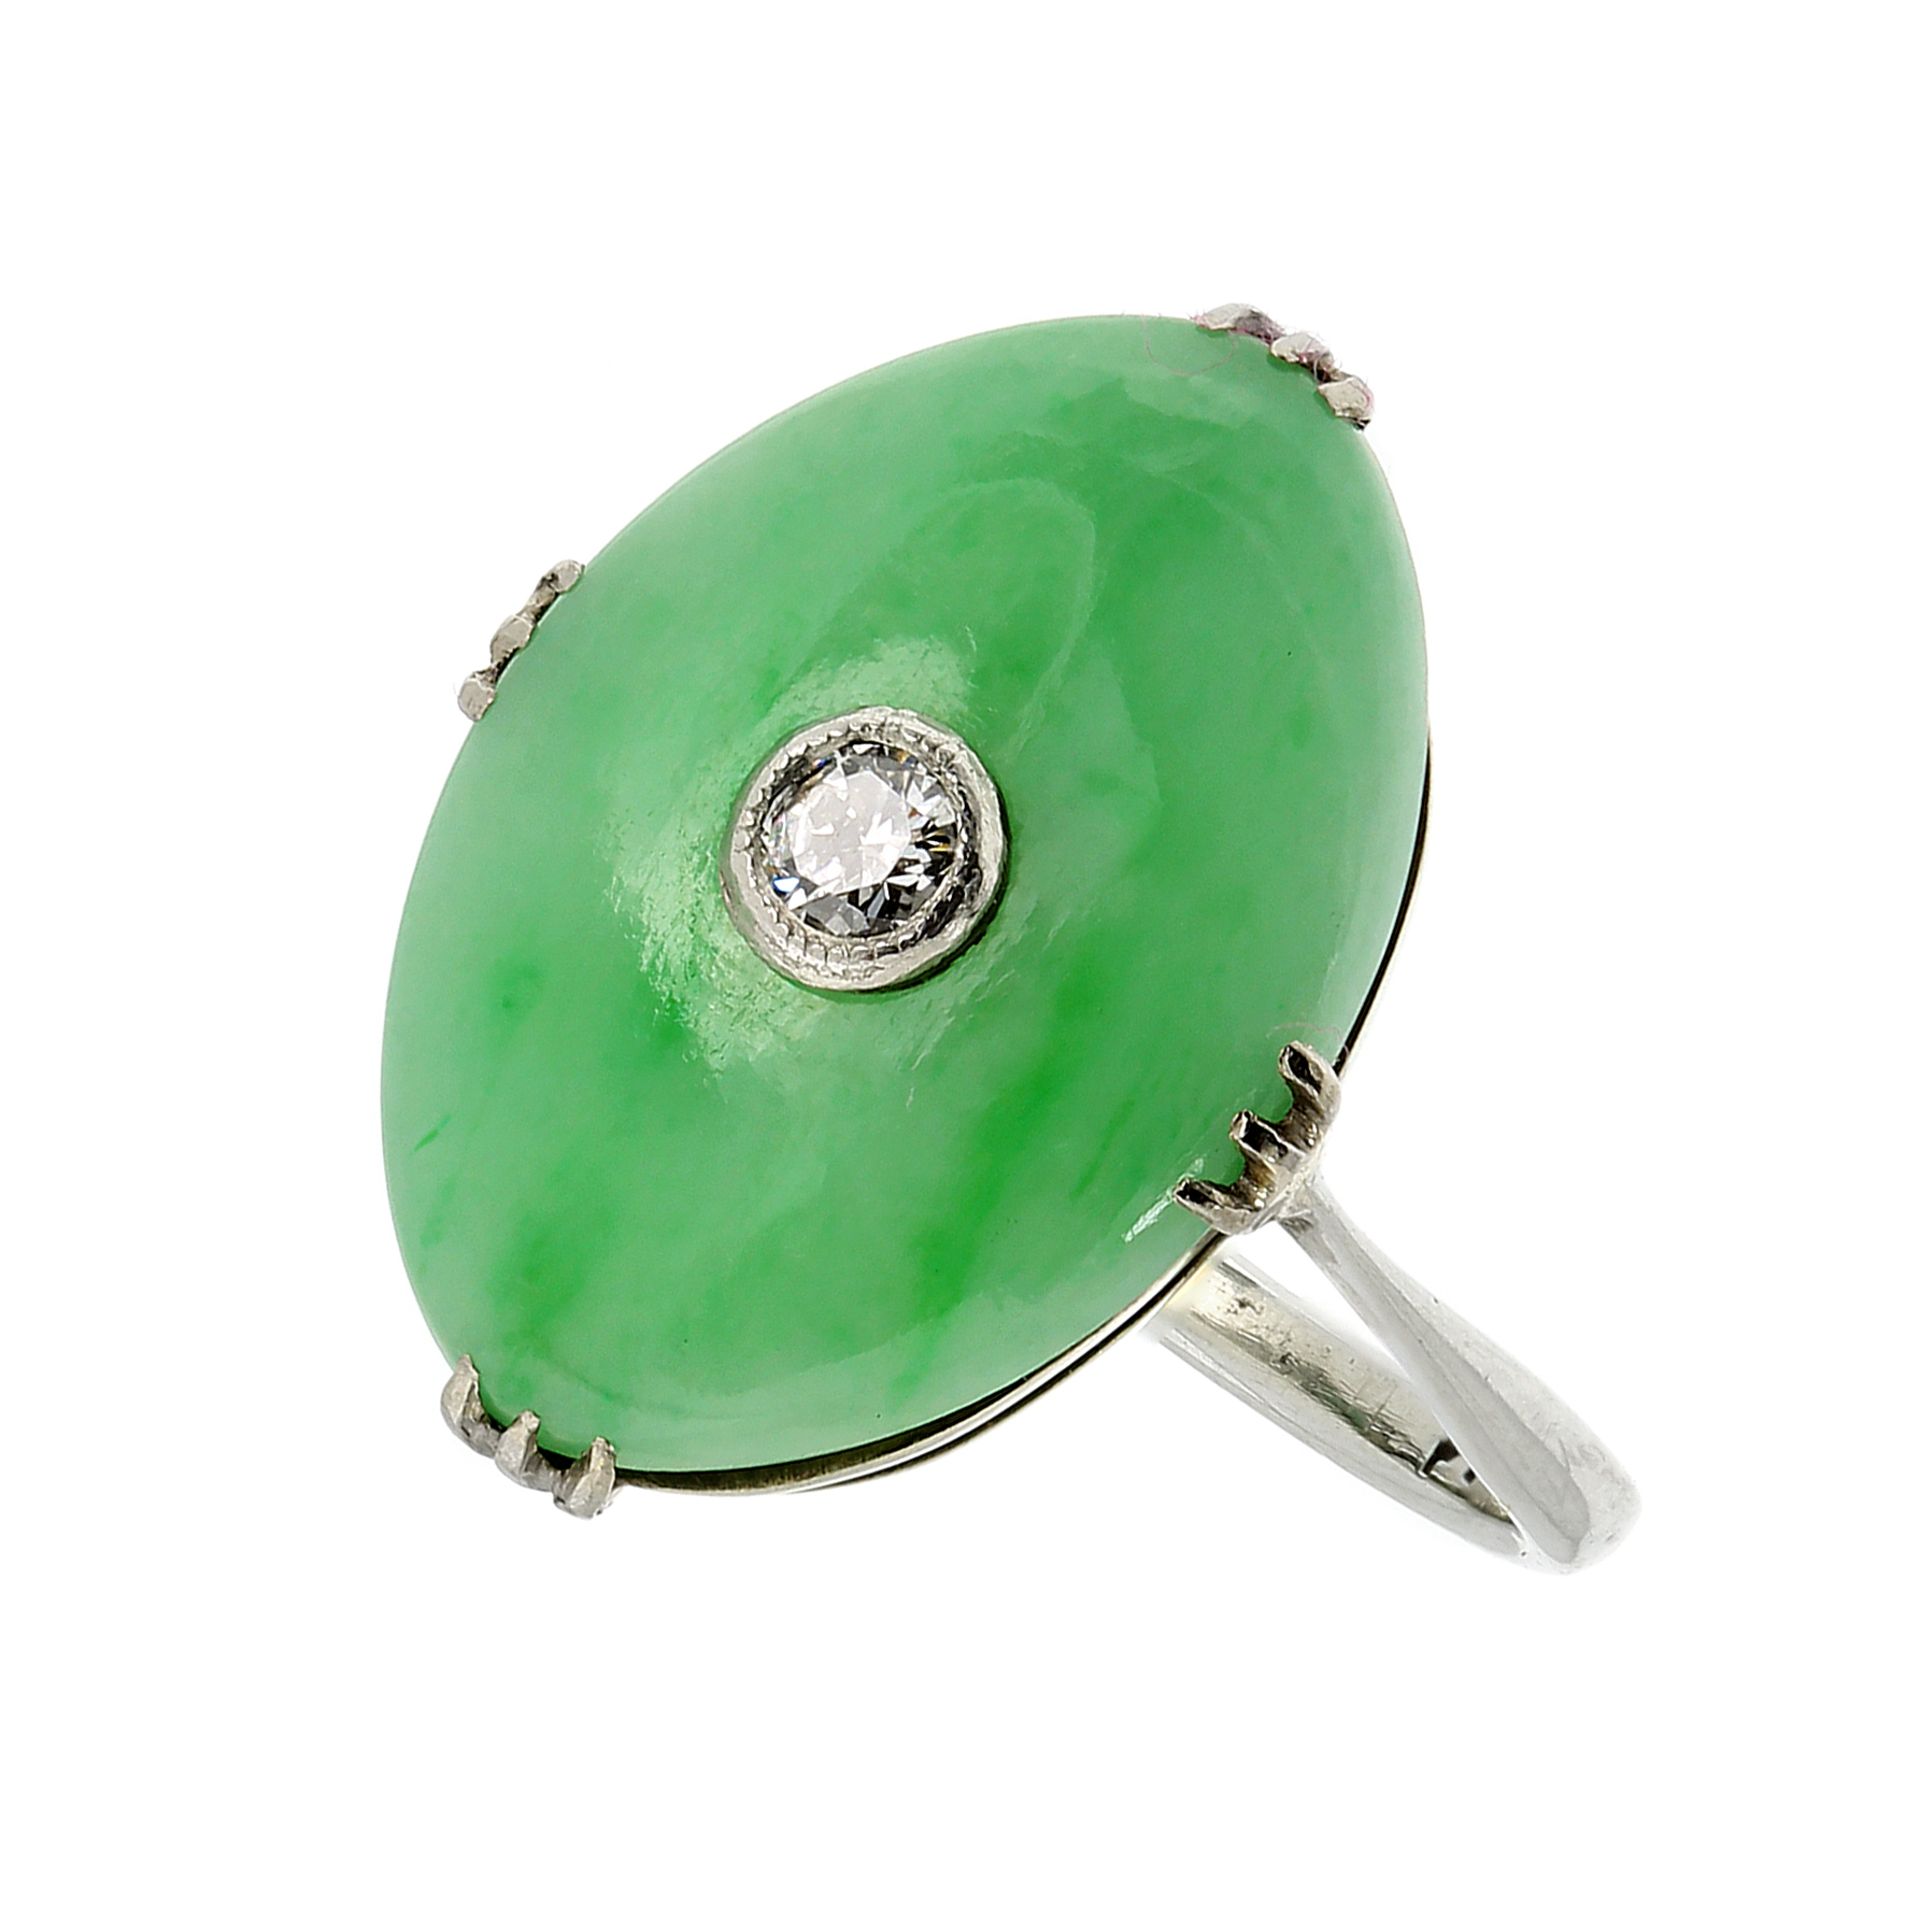 AN ART DECO JADEITE JADE AND DIAMOND DRESS RING CIRCA 1930 in 18ct white gold, the face formed of an